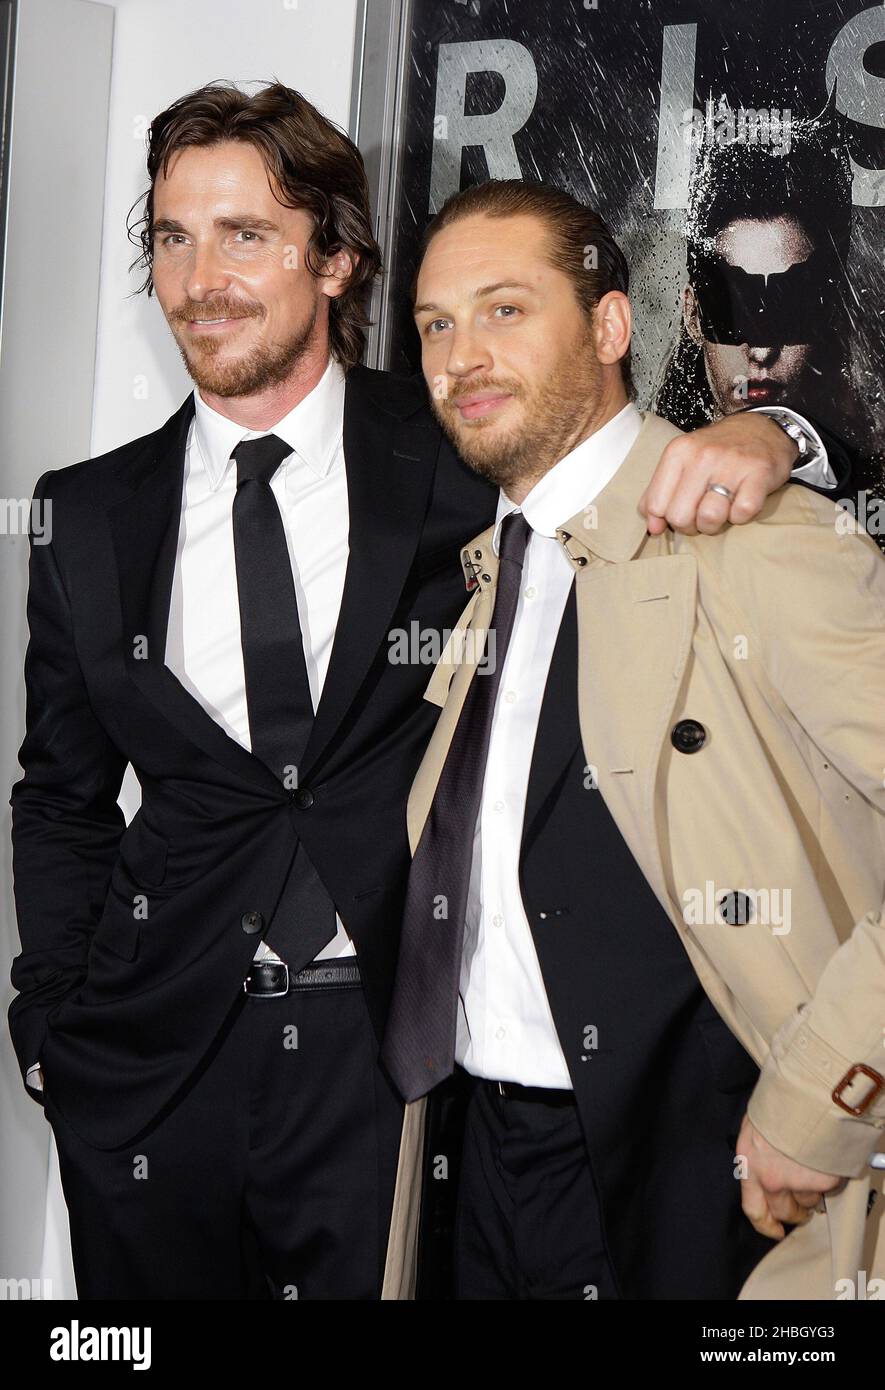 Christian bale and tom hardy hi-res stock photography and images - Alamy